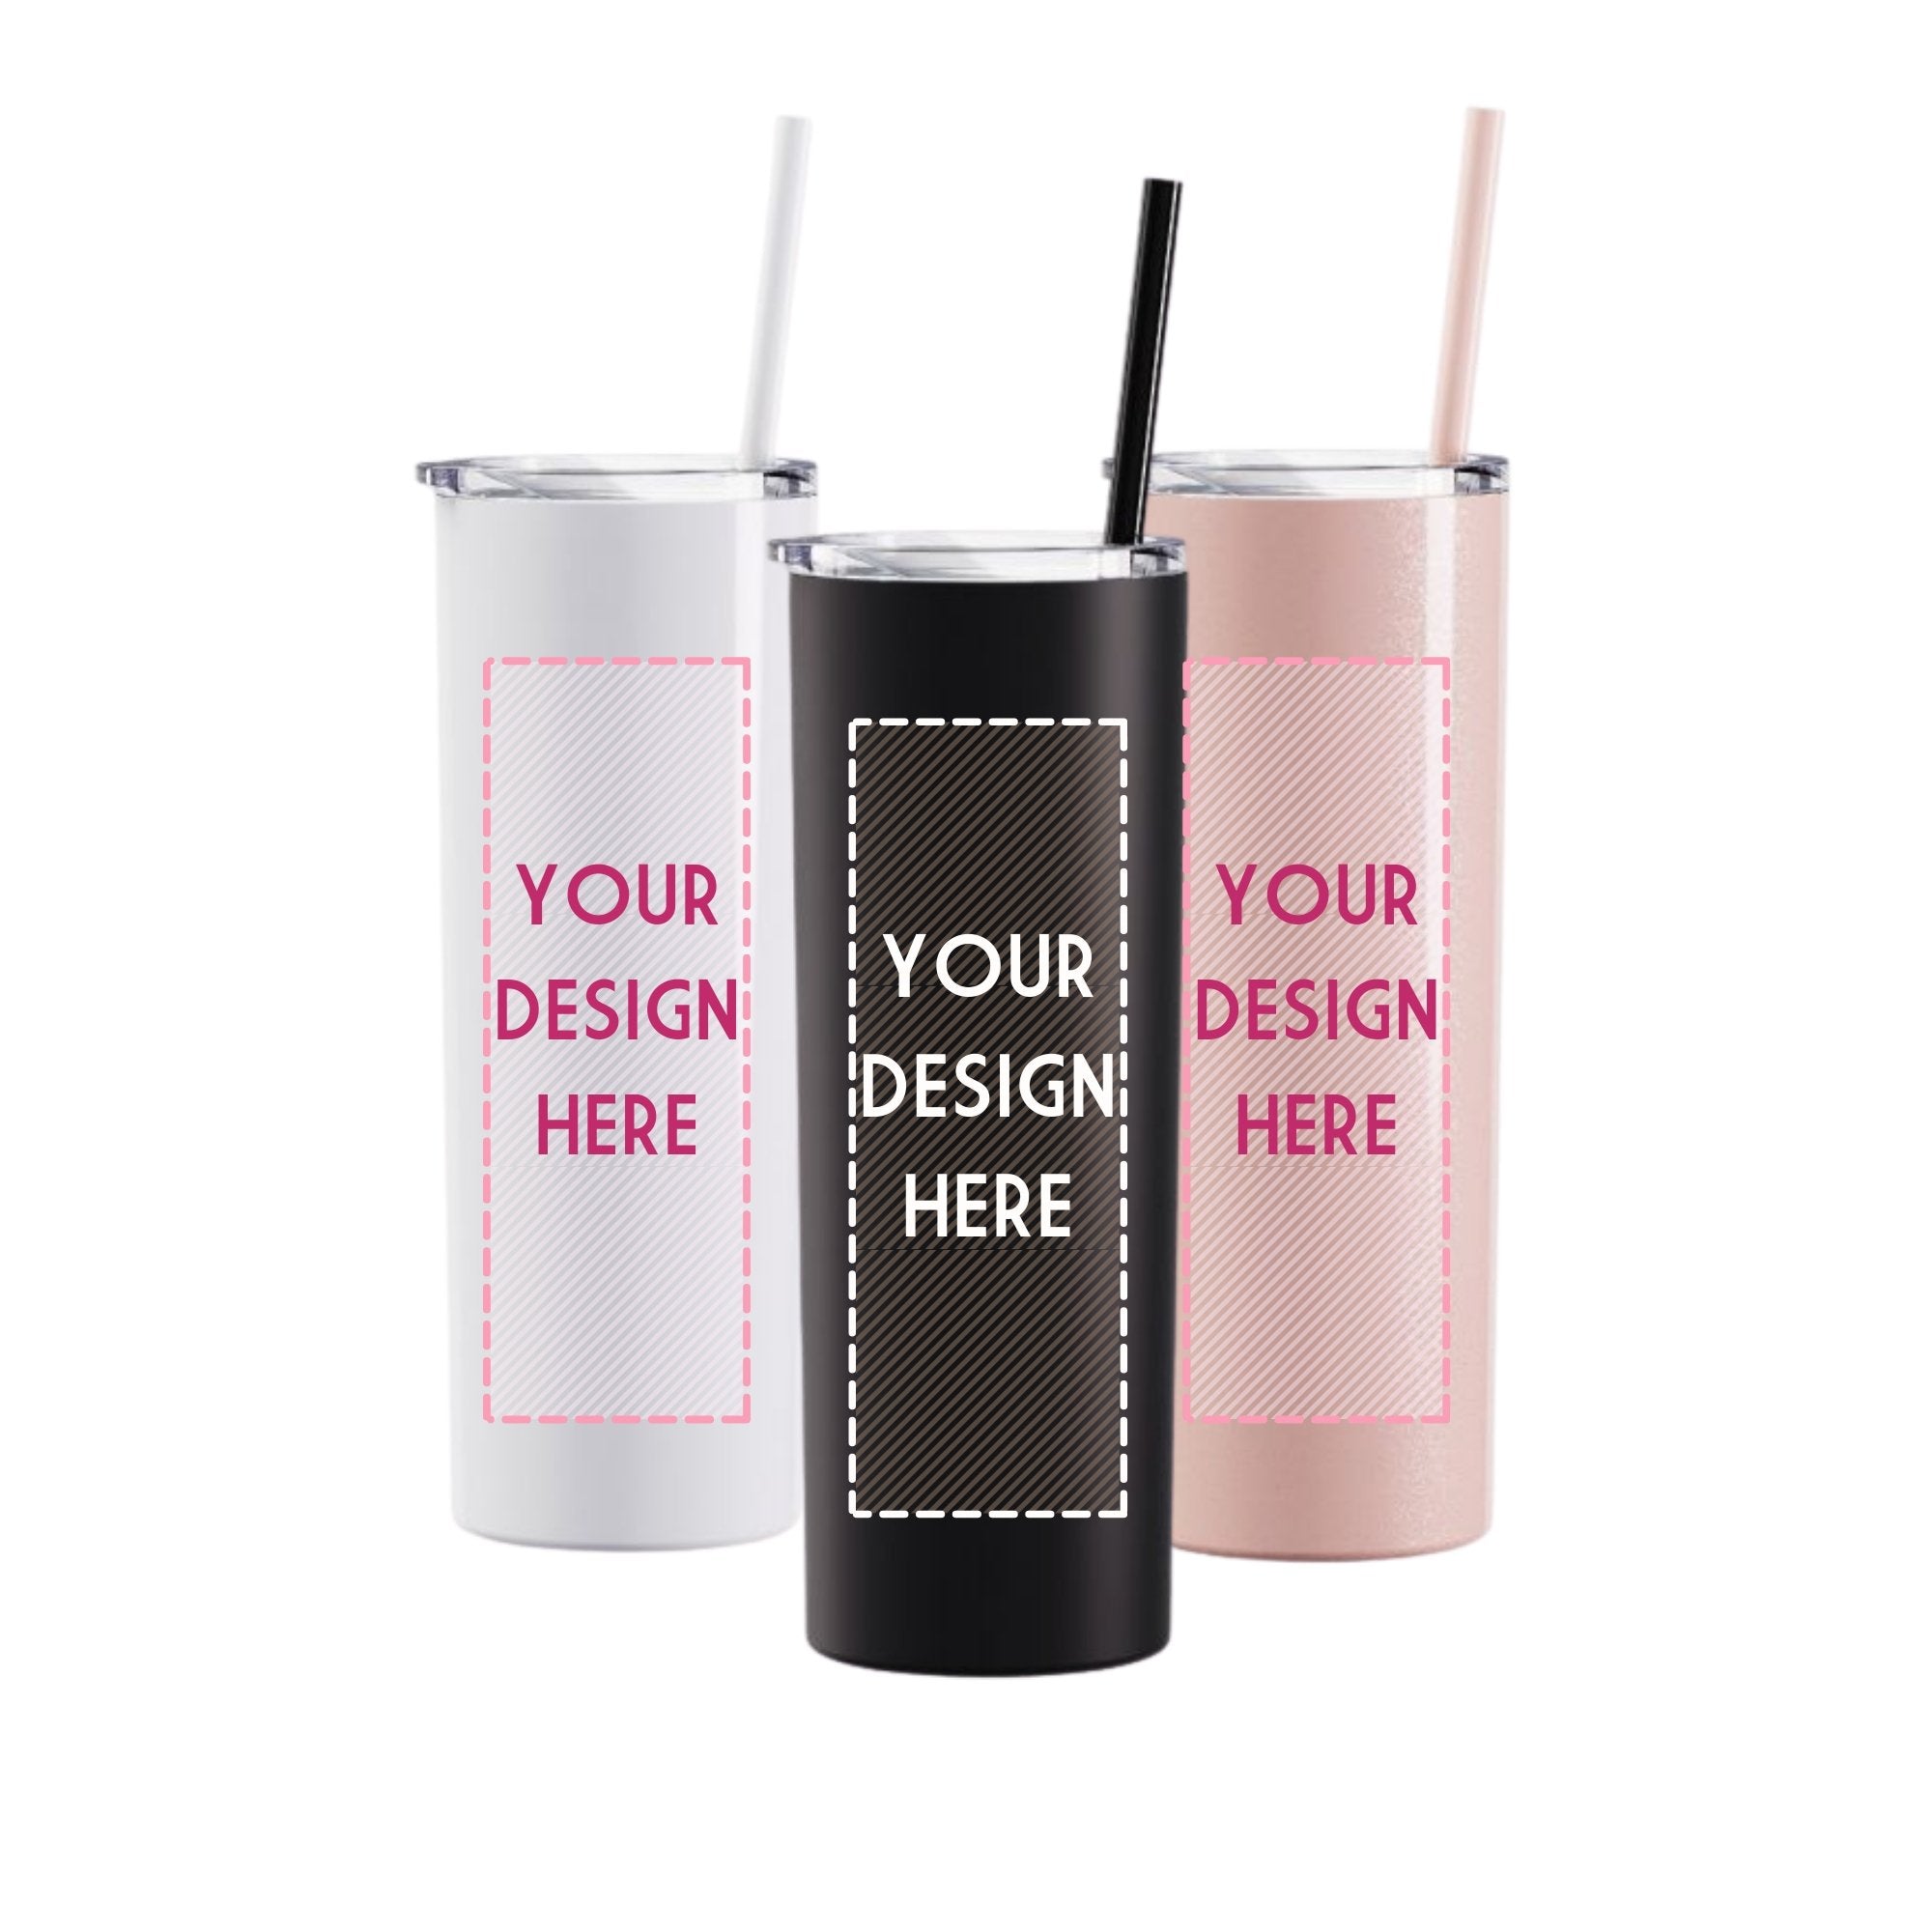 A white, black and pink metal tumbler with an area on the front for customization